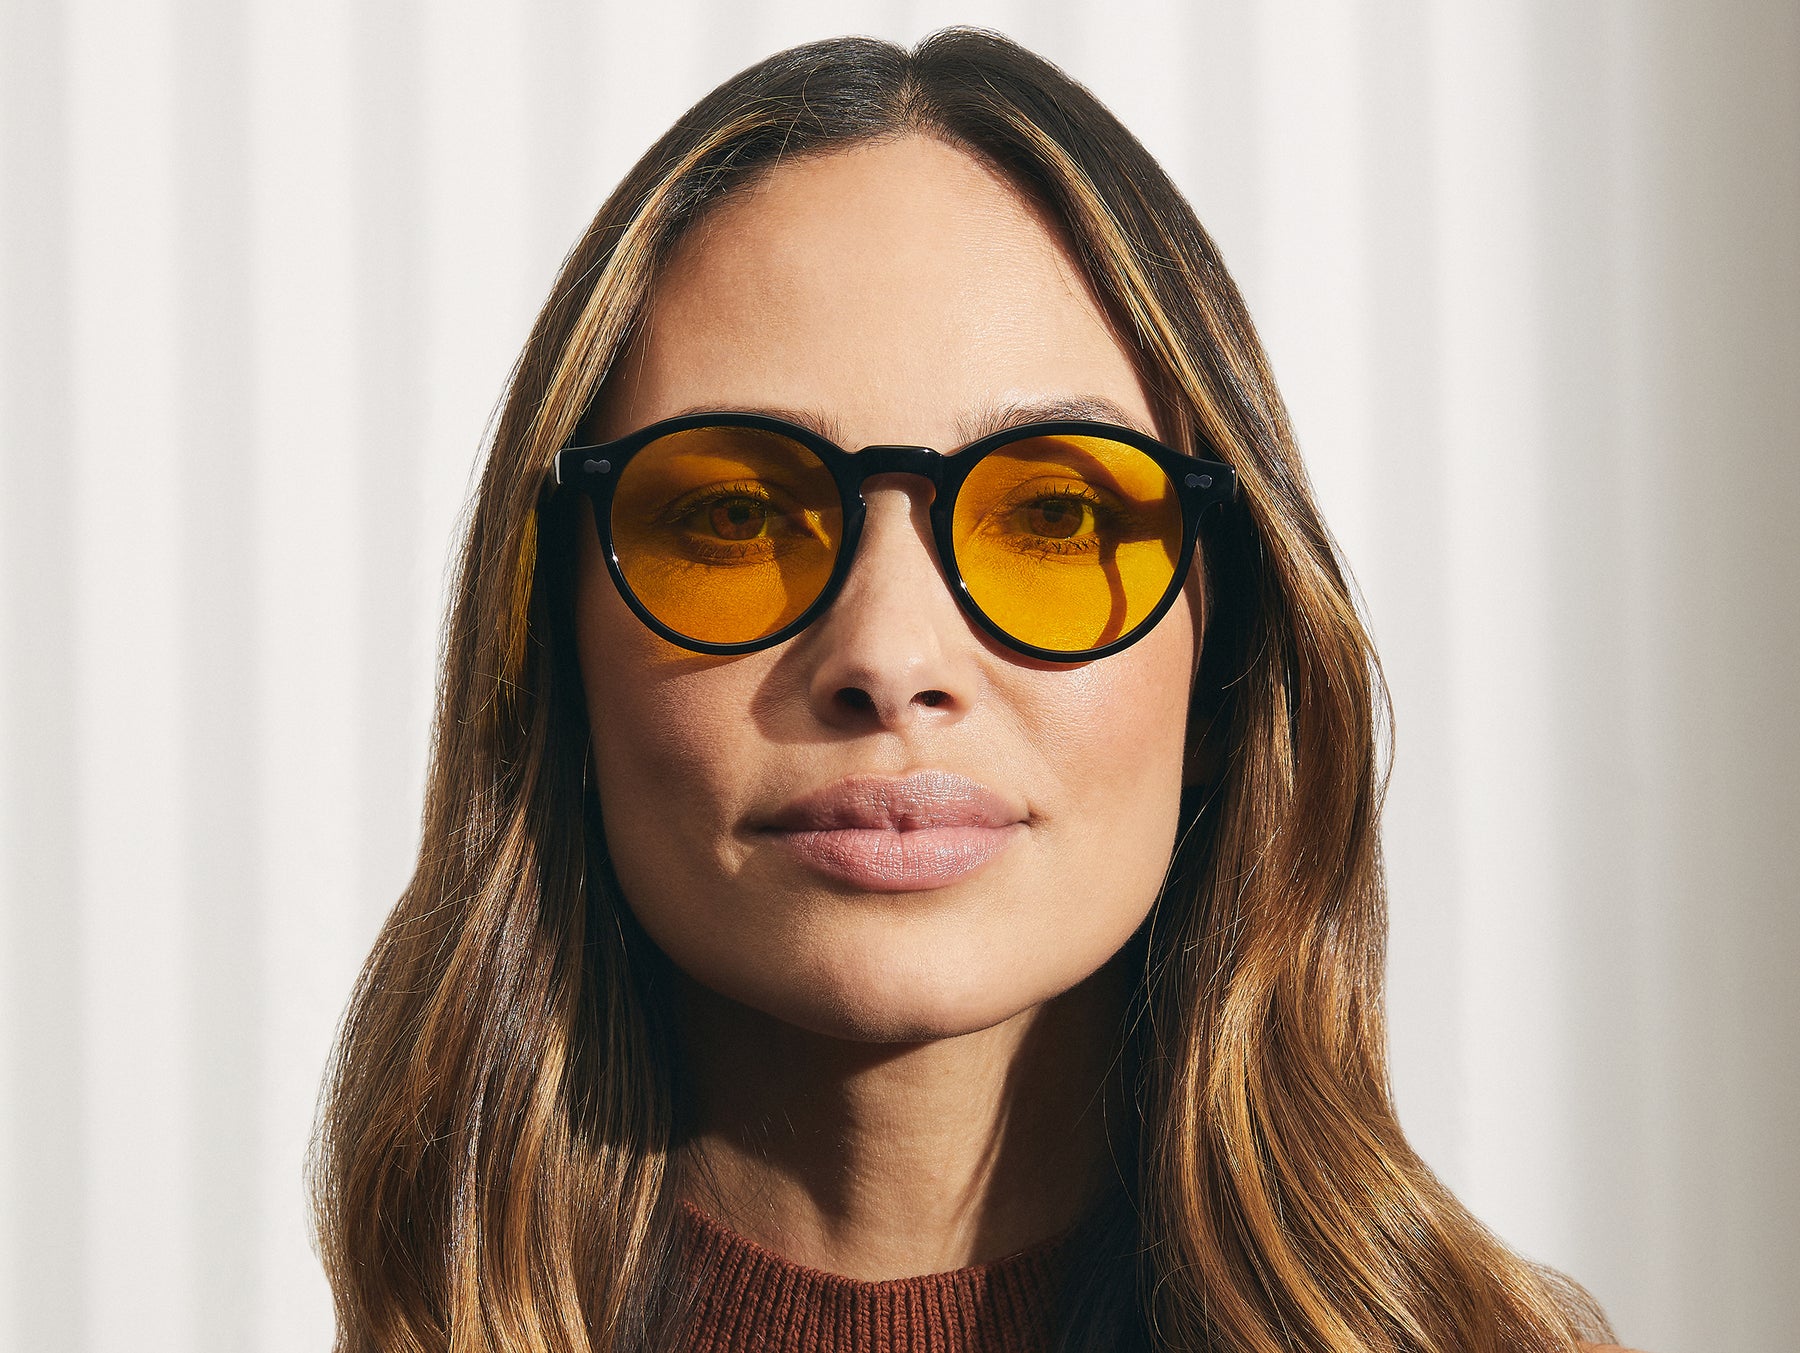 Model is wearing The MILTZEN in Black in size 49 with Mellow Yellow Tinted Lenses